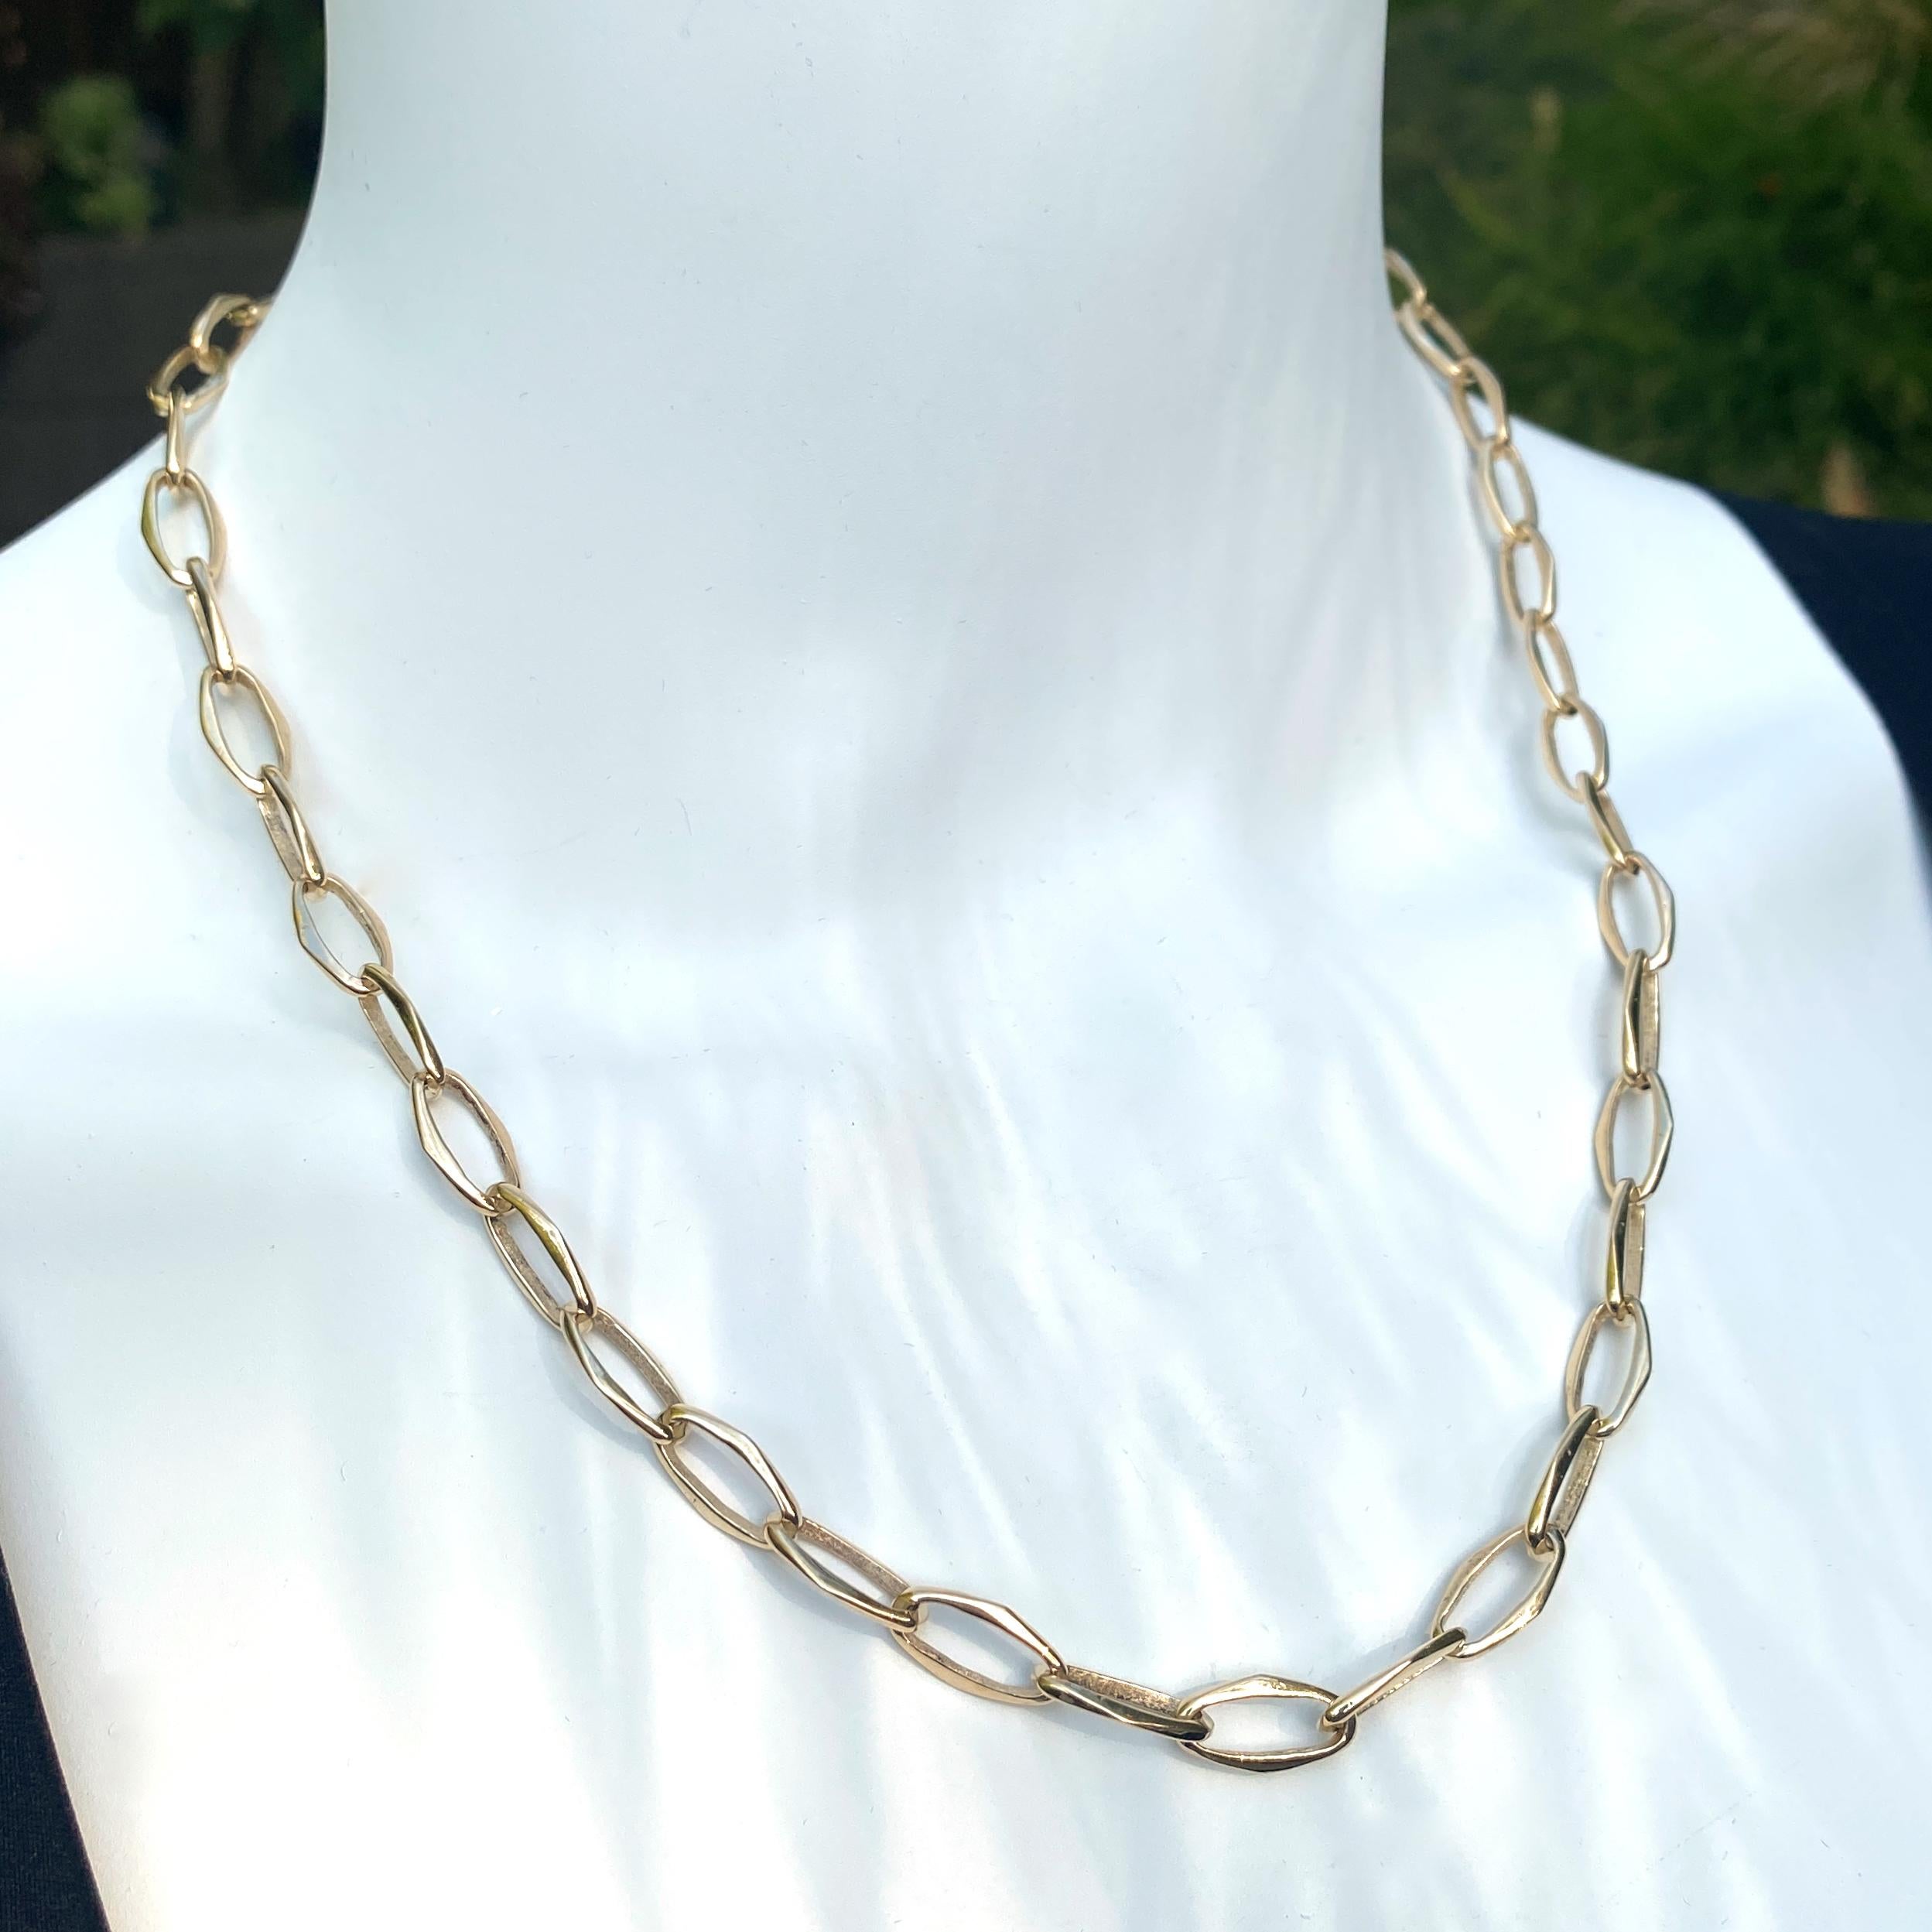 This unusual chain was crafted here in our shop by Eytan Brandes and features oval links that  bulge at the sides to form gentle points.

The closure is a small toggle mirroring the navette shape of the links.  

A gorgeous, one-of-a-kind piece In